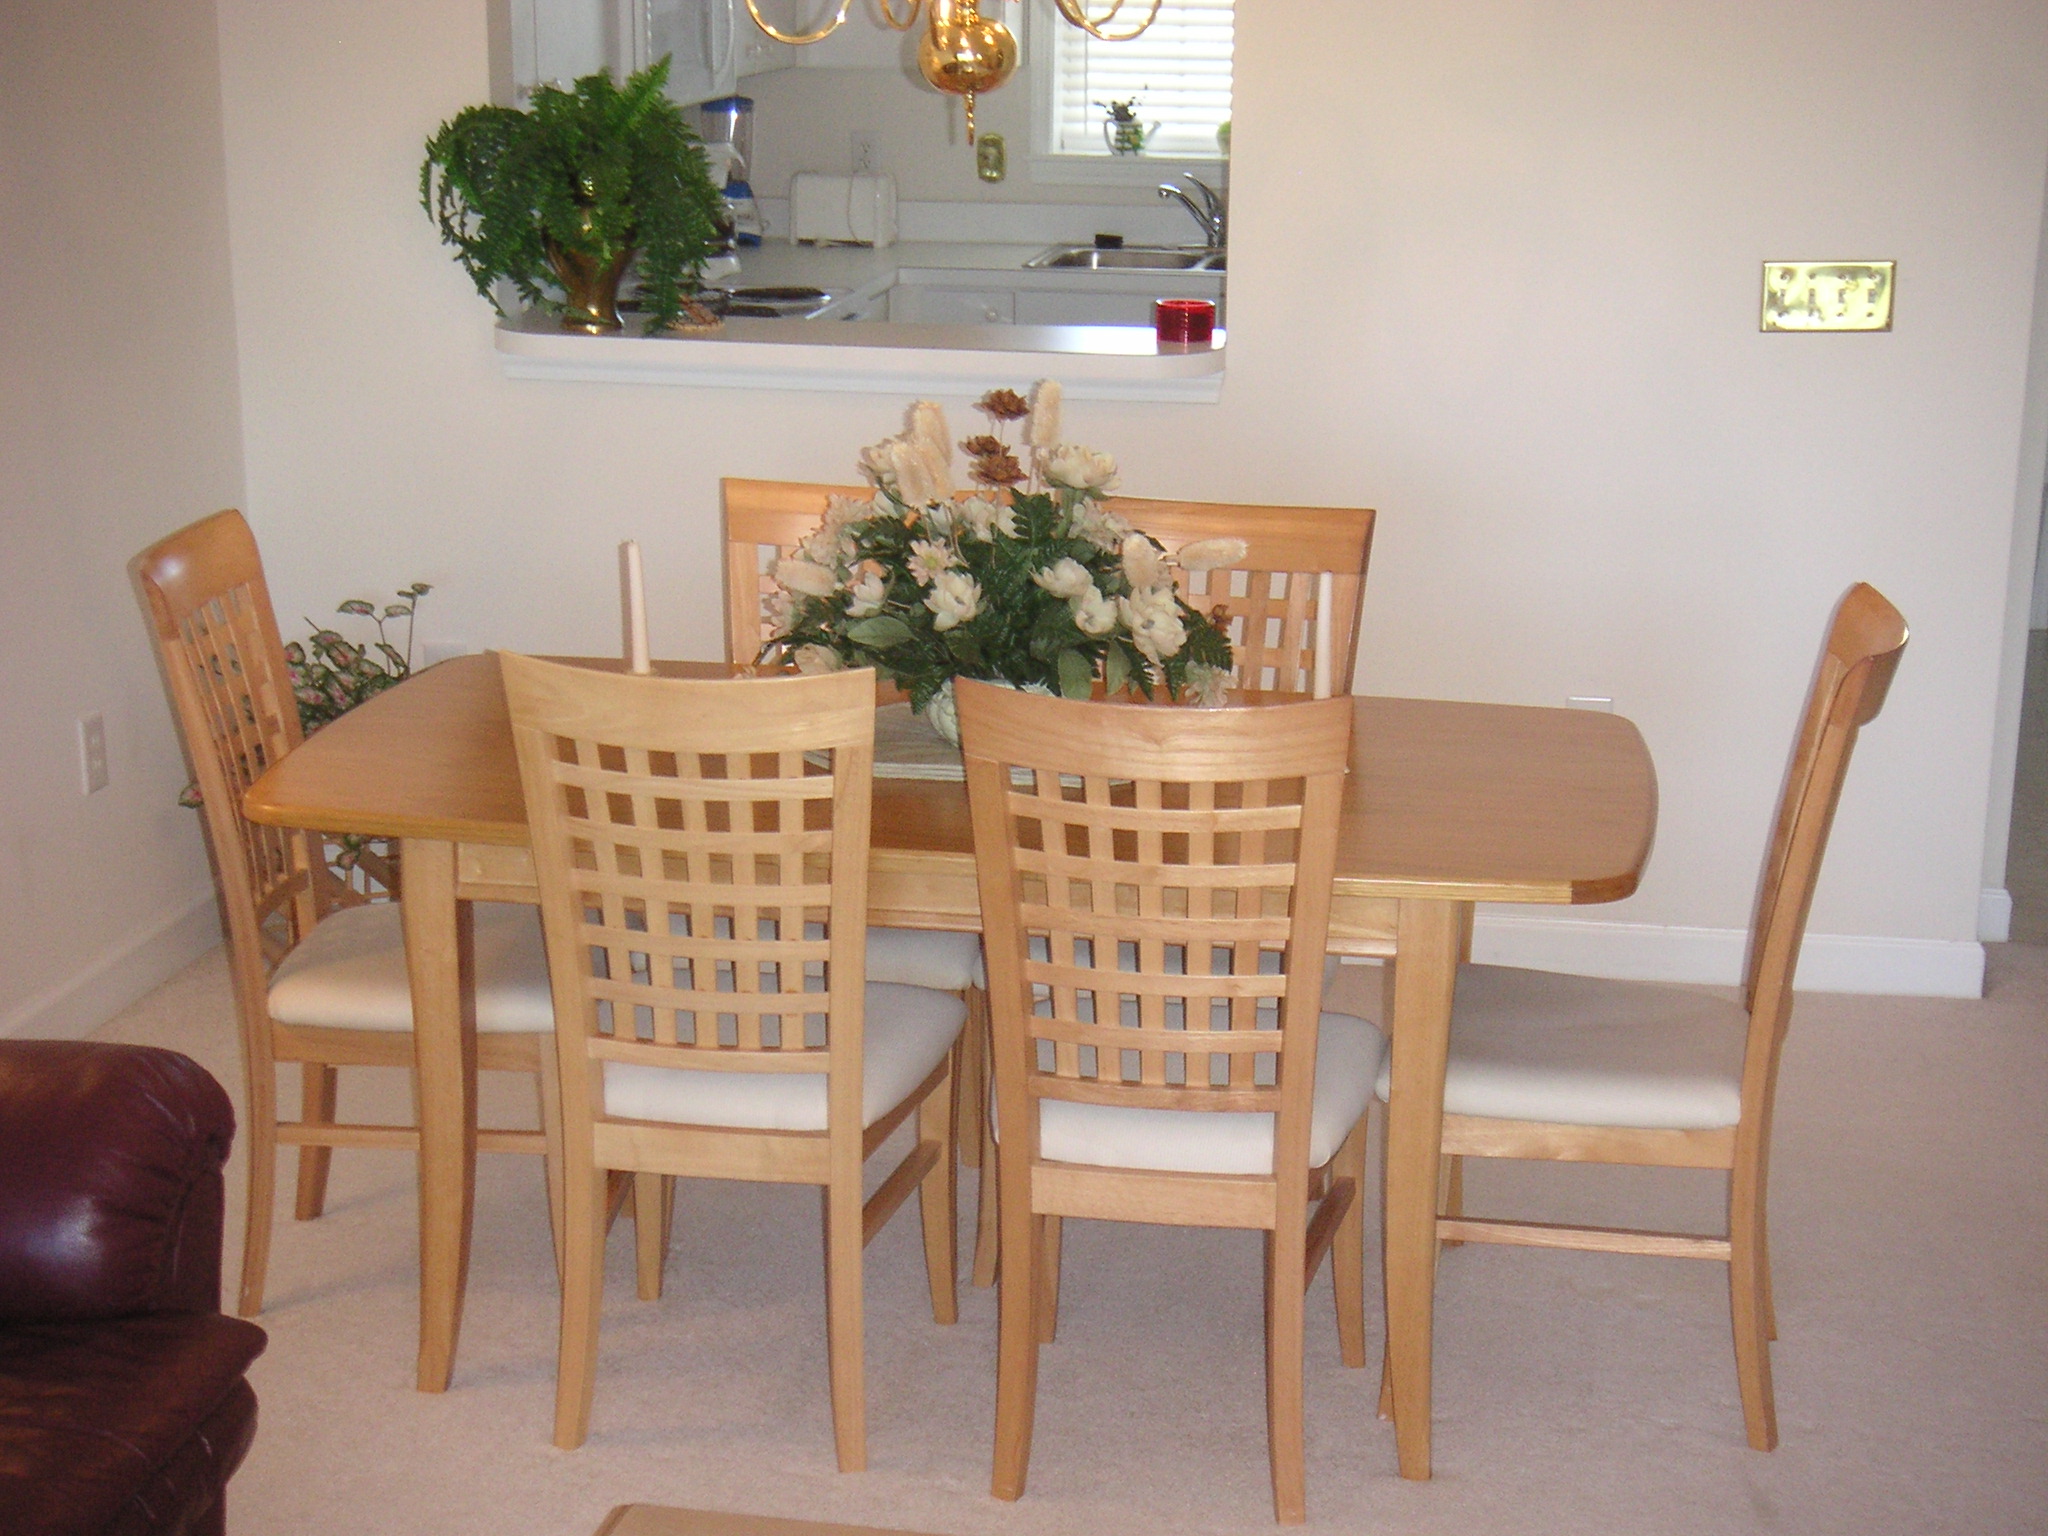 Bright and Airy Dining Area Seats 6